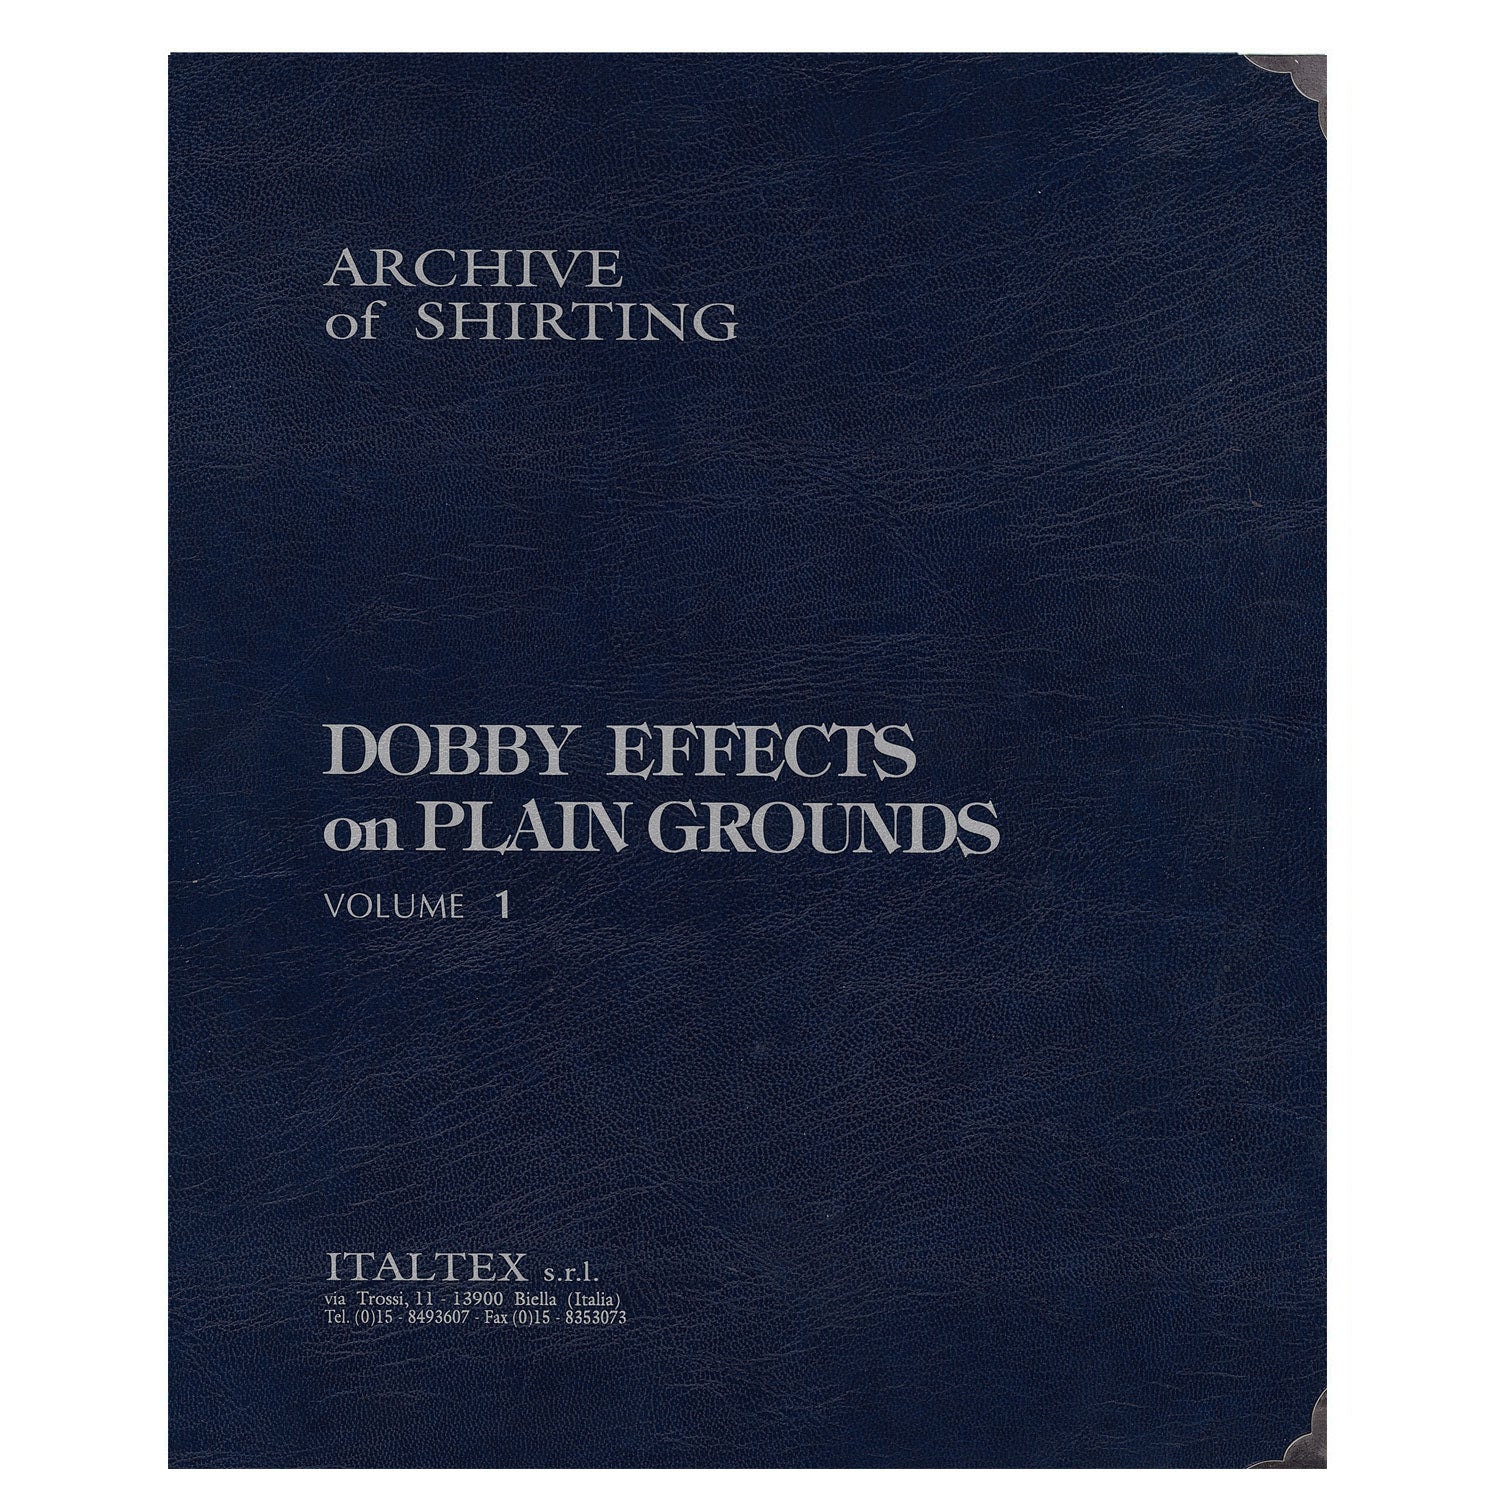 DOBBY EFFECTS on PLAIN GROUNDS